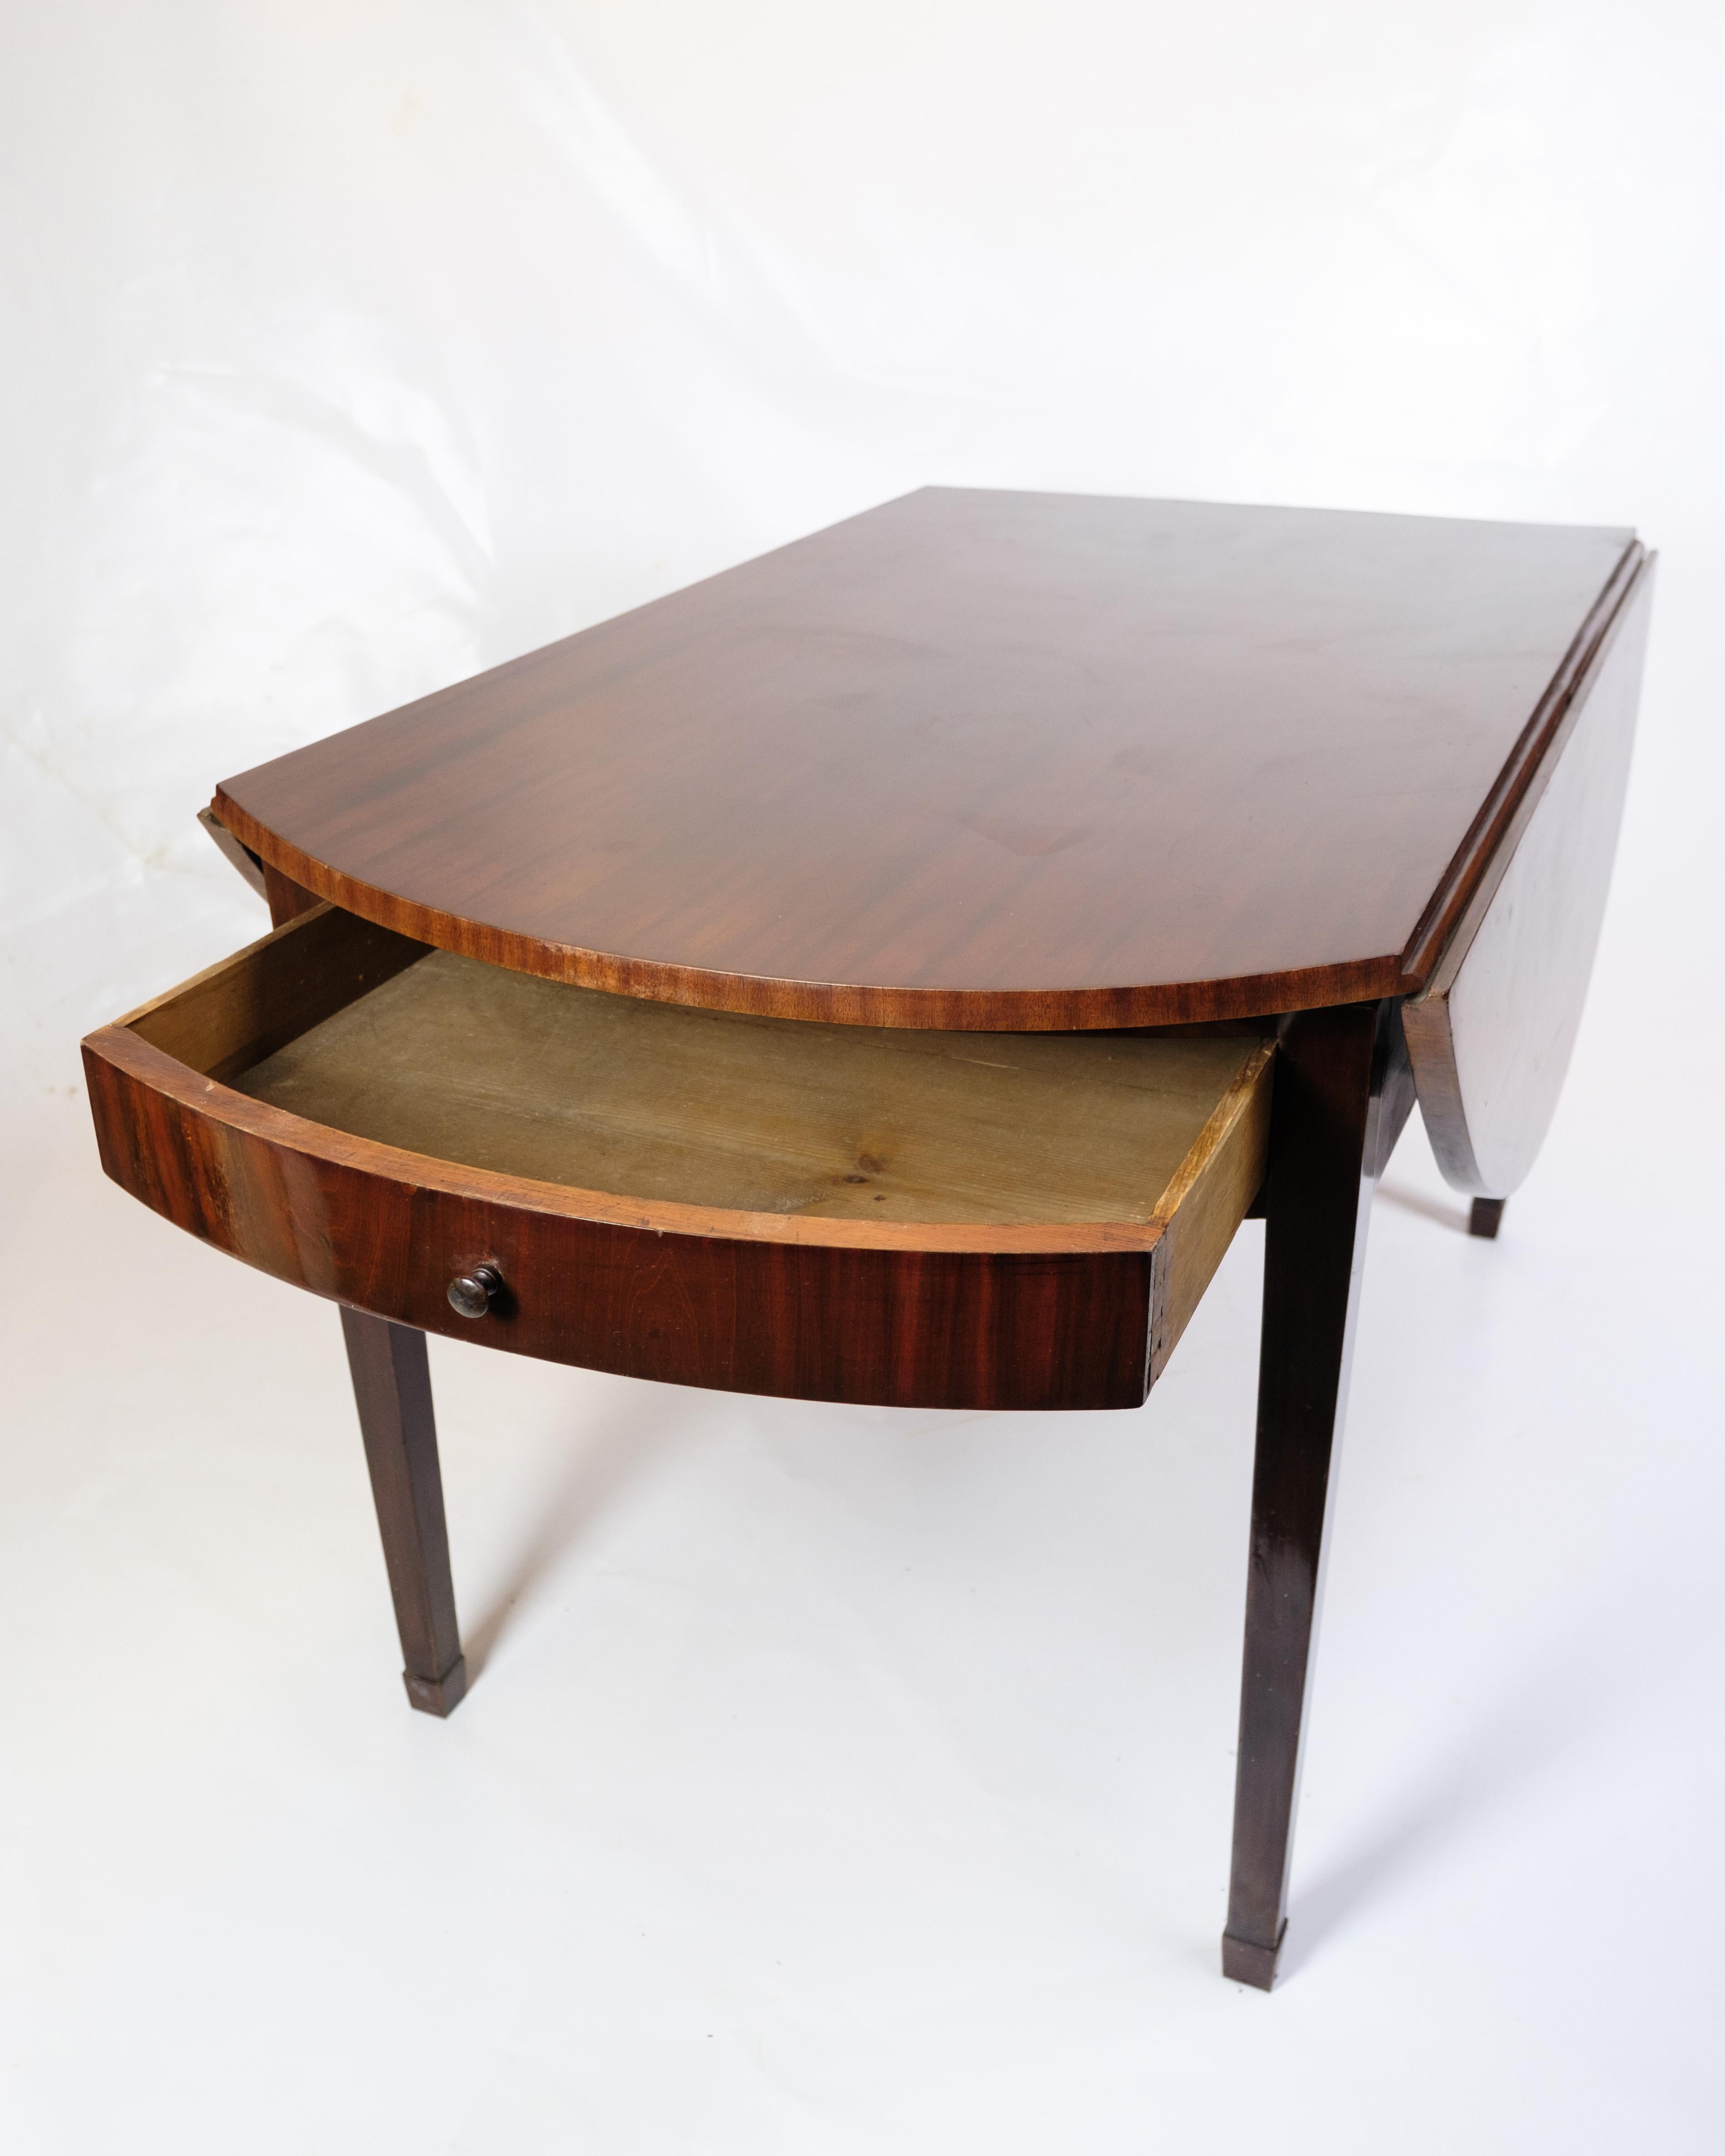 Antique Folding Table Made In Polished Mahogany From 1840s For Sale 2